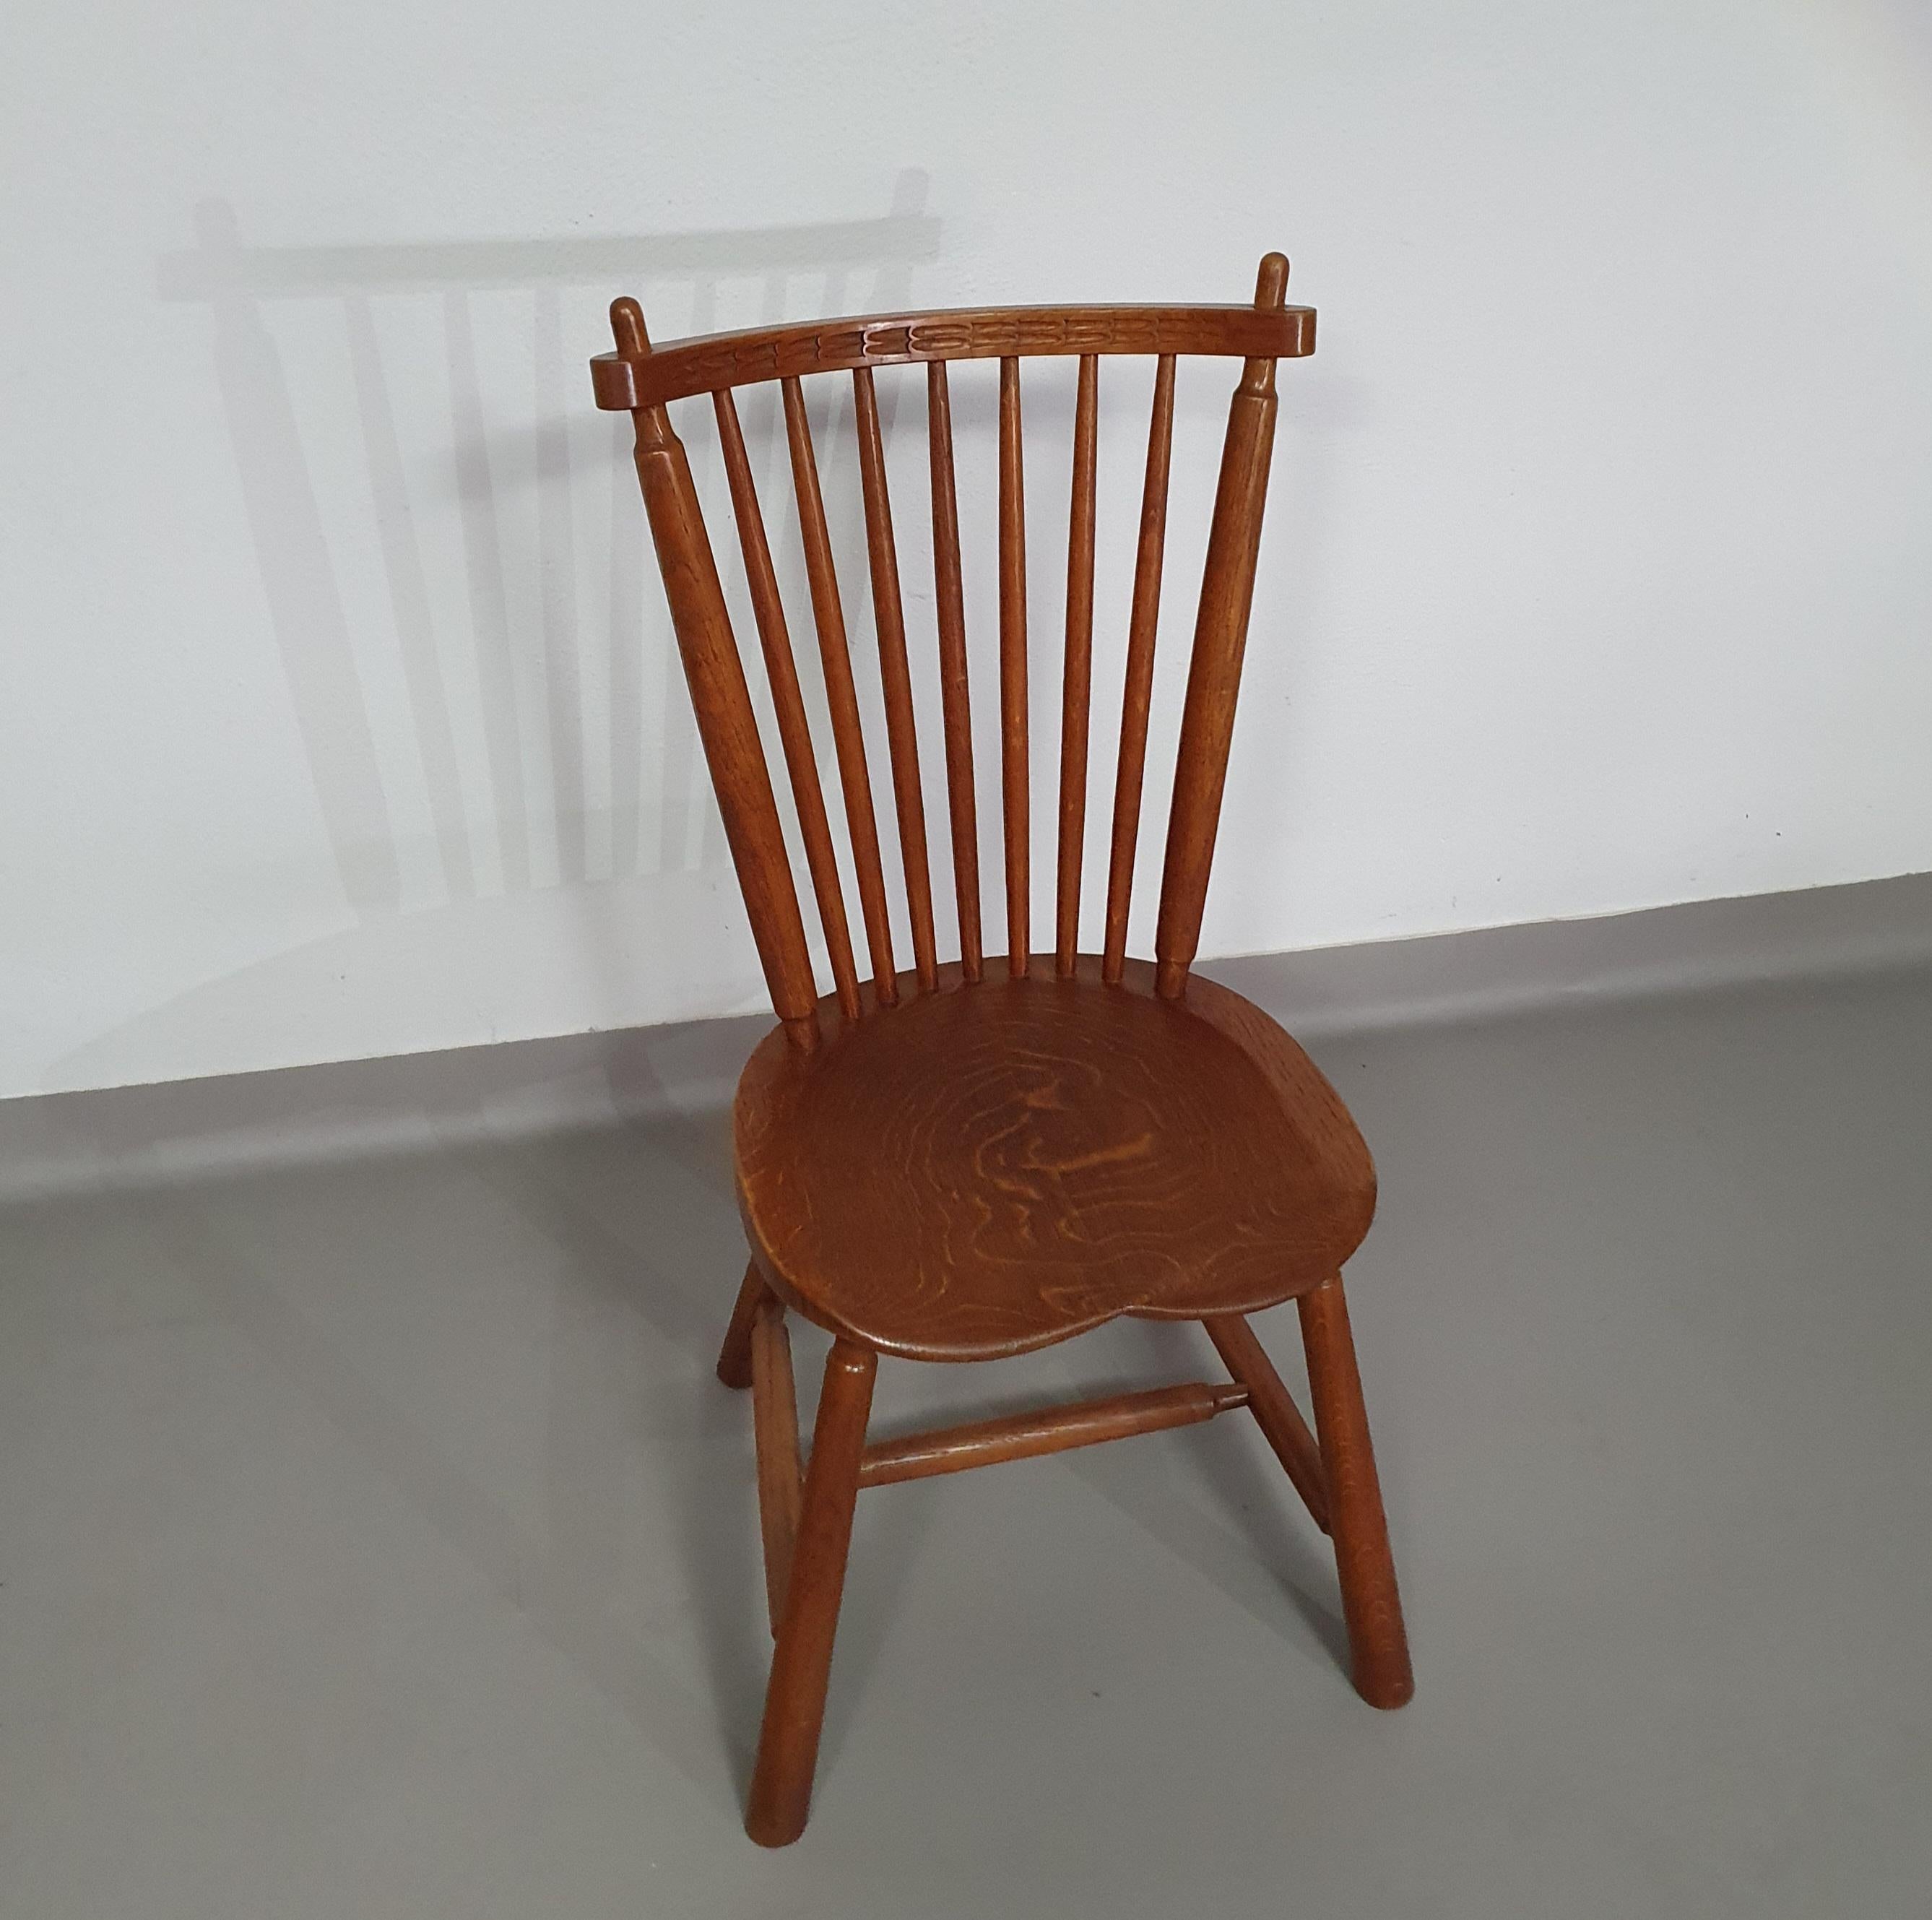 De Ster Gelderland Spindle Back dining chair 6 x in solid Oak. With a small carved decoration in the back rest.
1960s
Width 50
Depth 50
Height 89
Seat height 47
Seat depth 41 cm